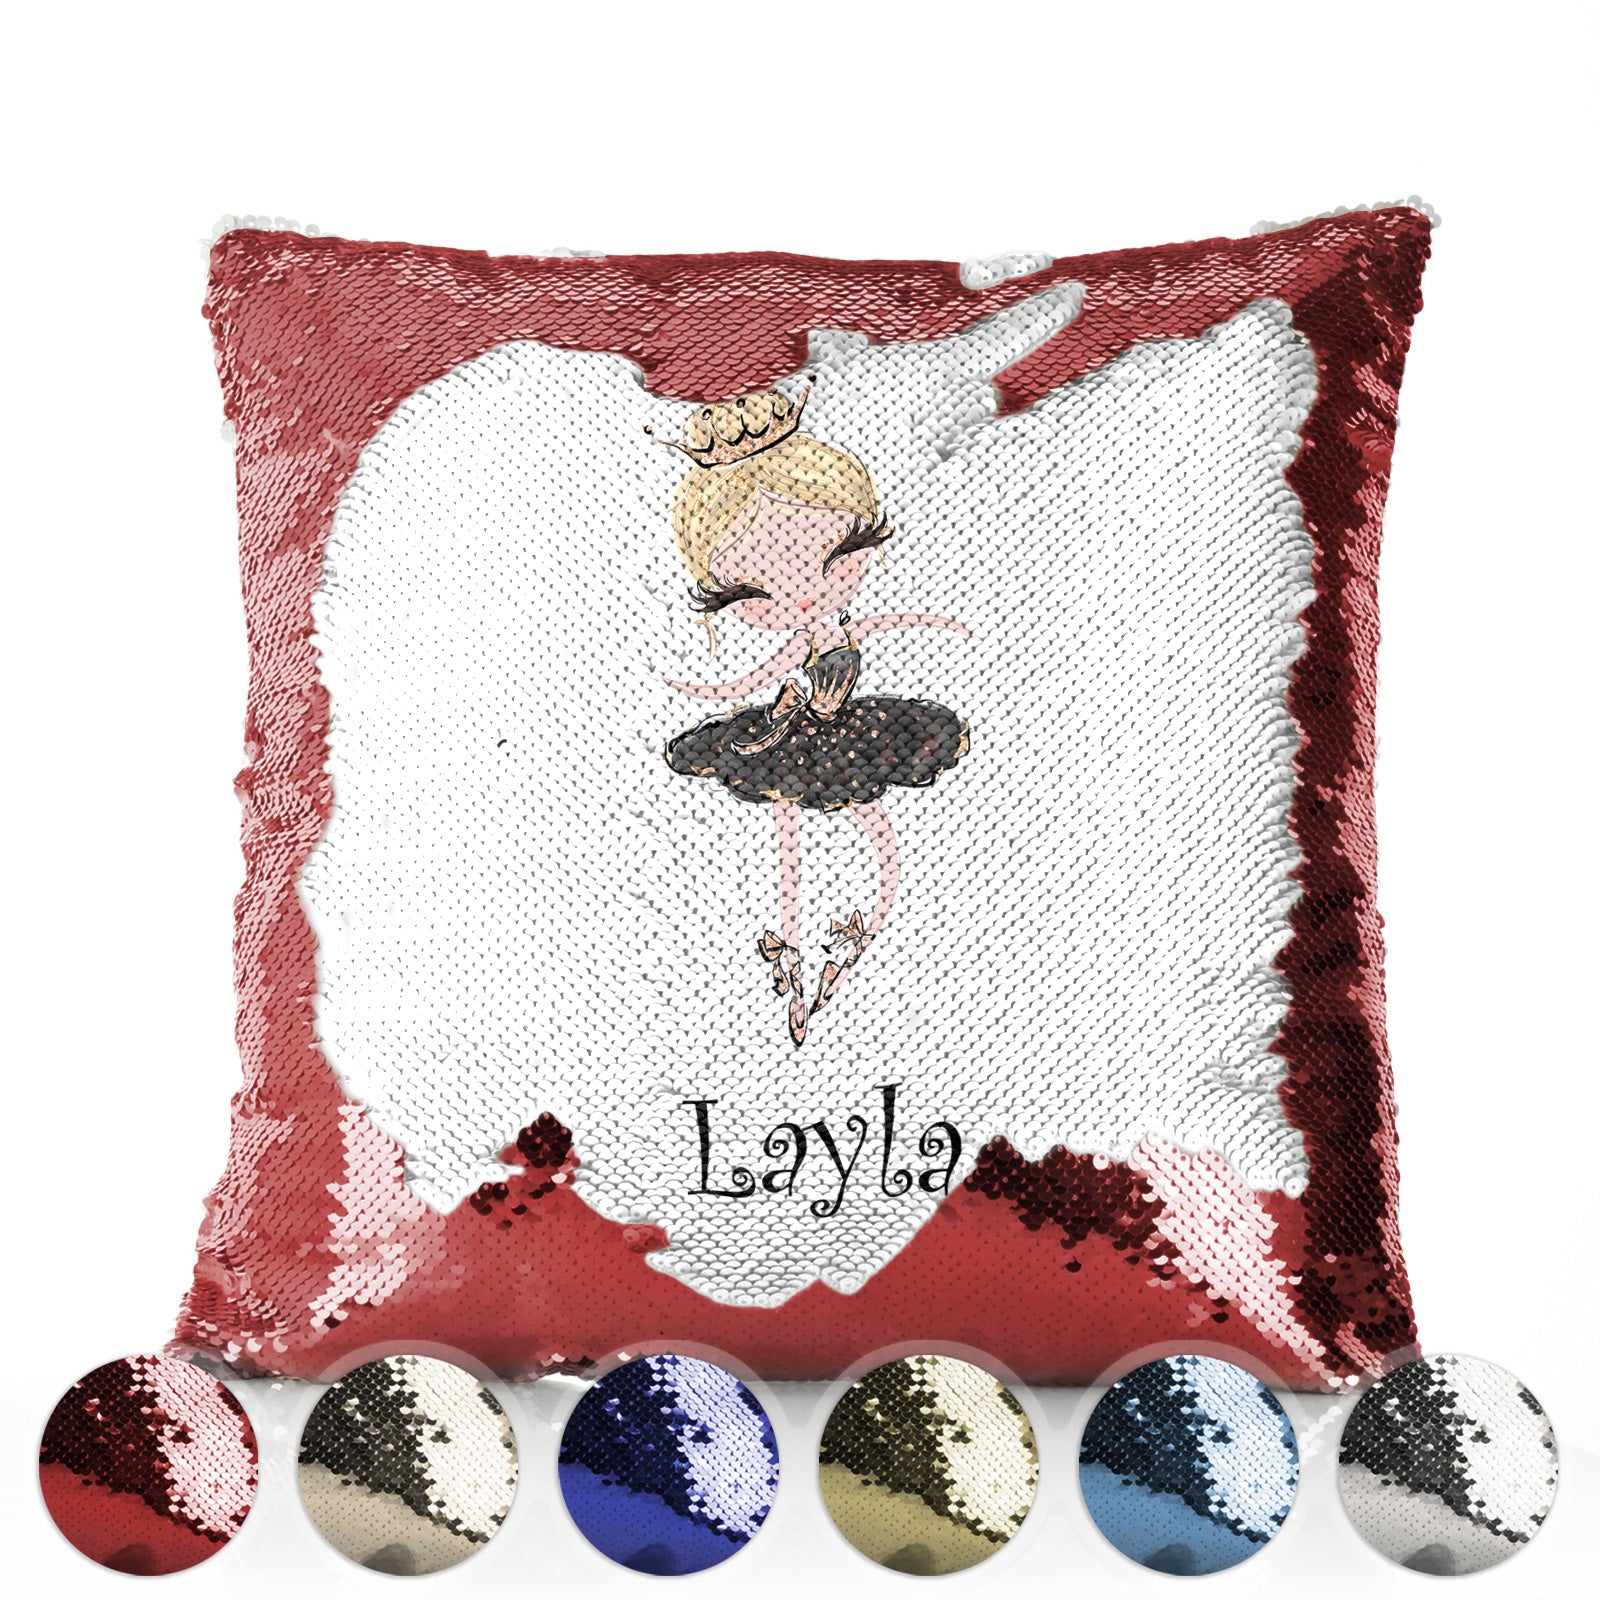 Personalised Sequin Cushion with Cute Text and Blonde Hair Black Dress Tiara Ballerina